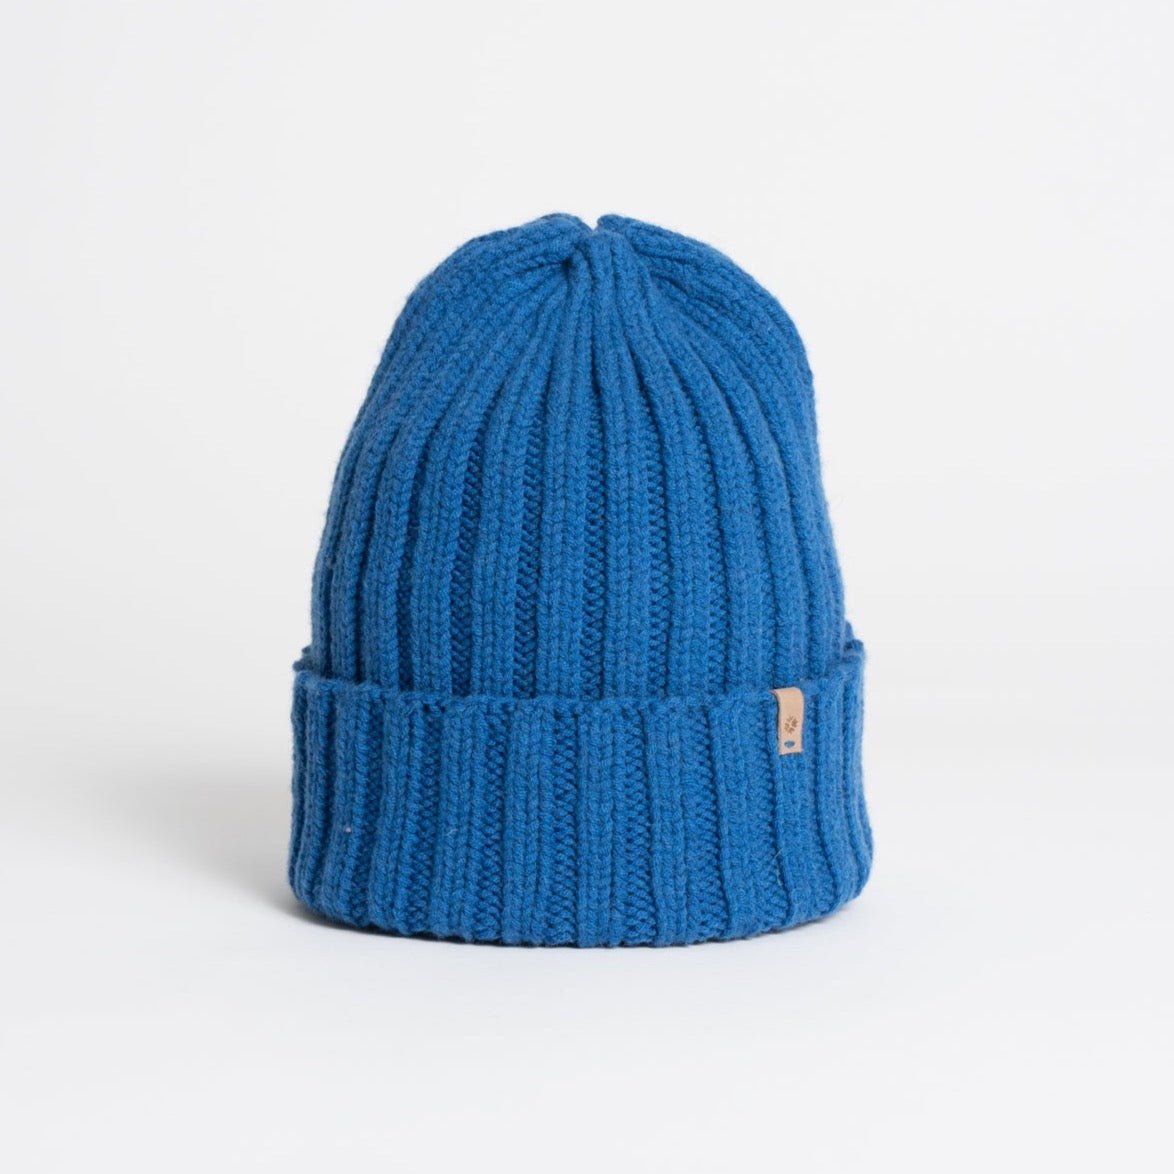 A bright blue cuffed hat with thick ribbed design and decrease detail at the top. The Merino Thick Rib Hat in Ocean Blue is designed by Dinadi and hand knitted in Kathmandu, Nepal.